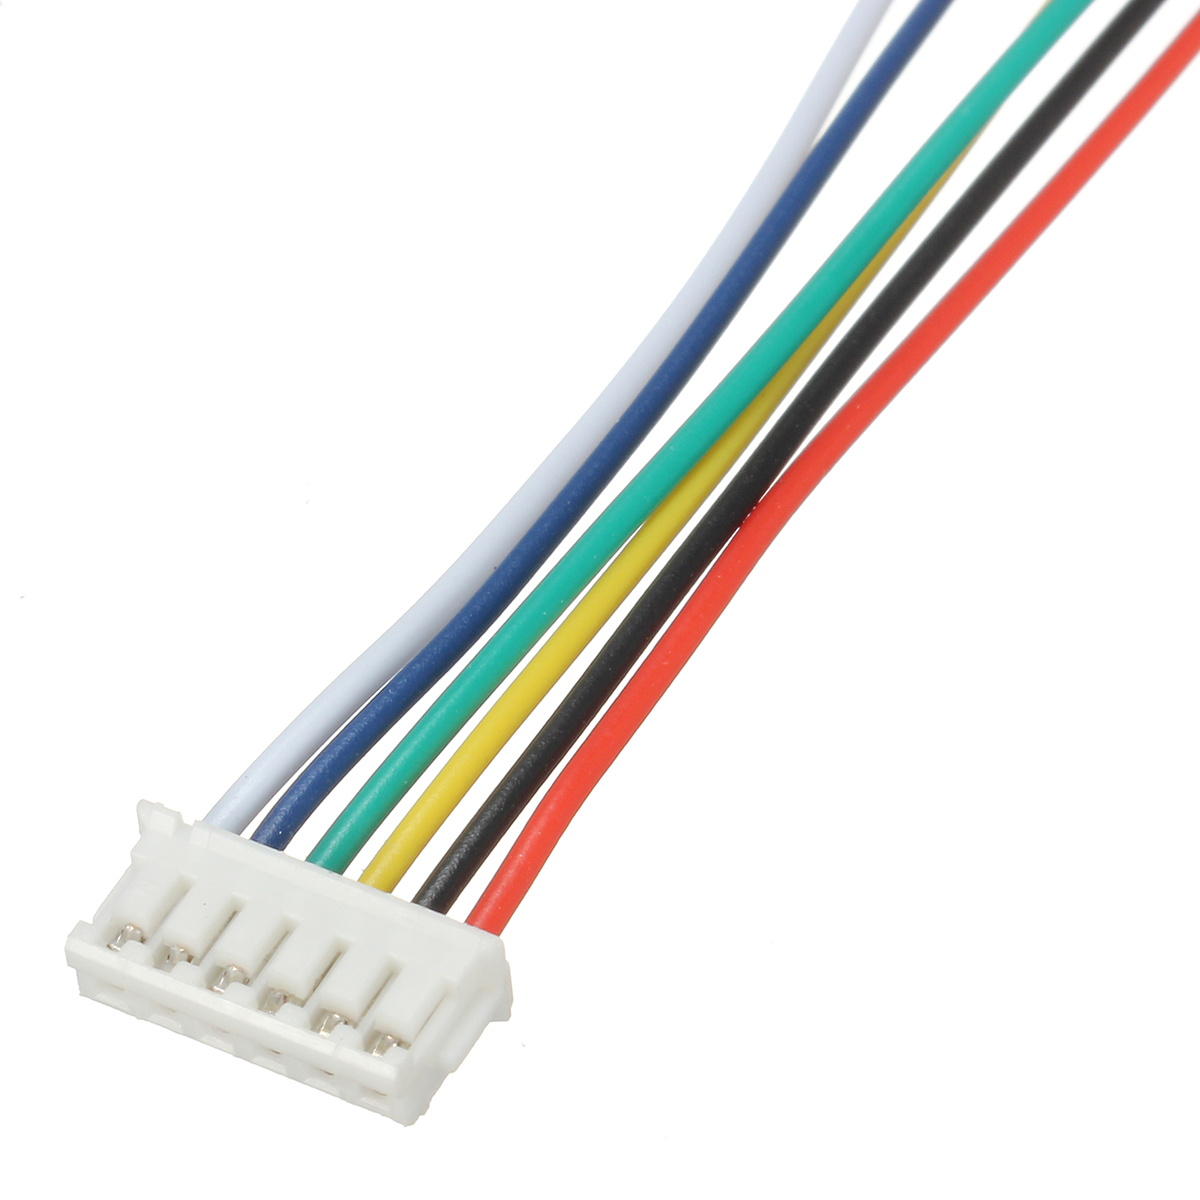 Excellwayreg-Mini-Micro-JST-15mm-ZH-6-Pin-Connector-Plug-and-Wires-Cables-15cm-10-Set-1170230-4